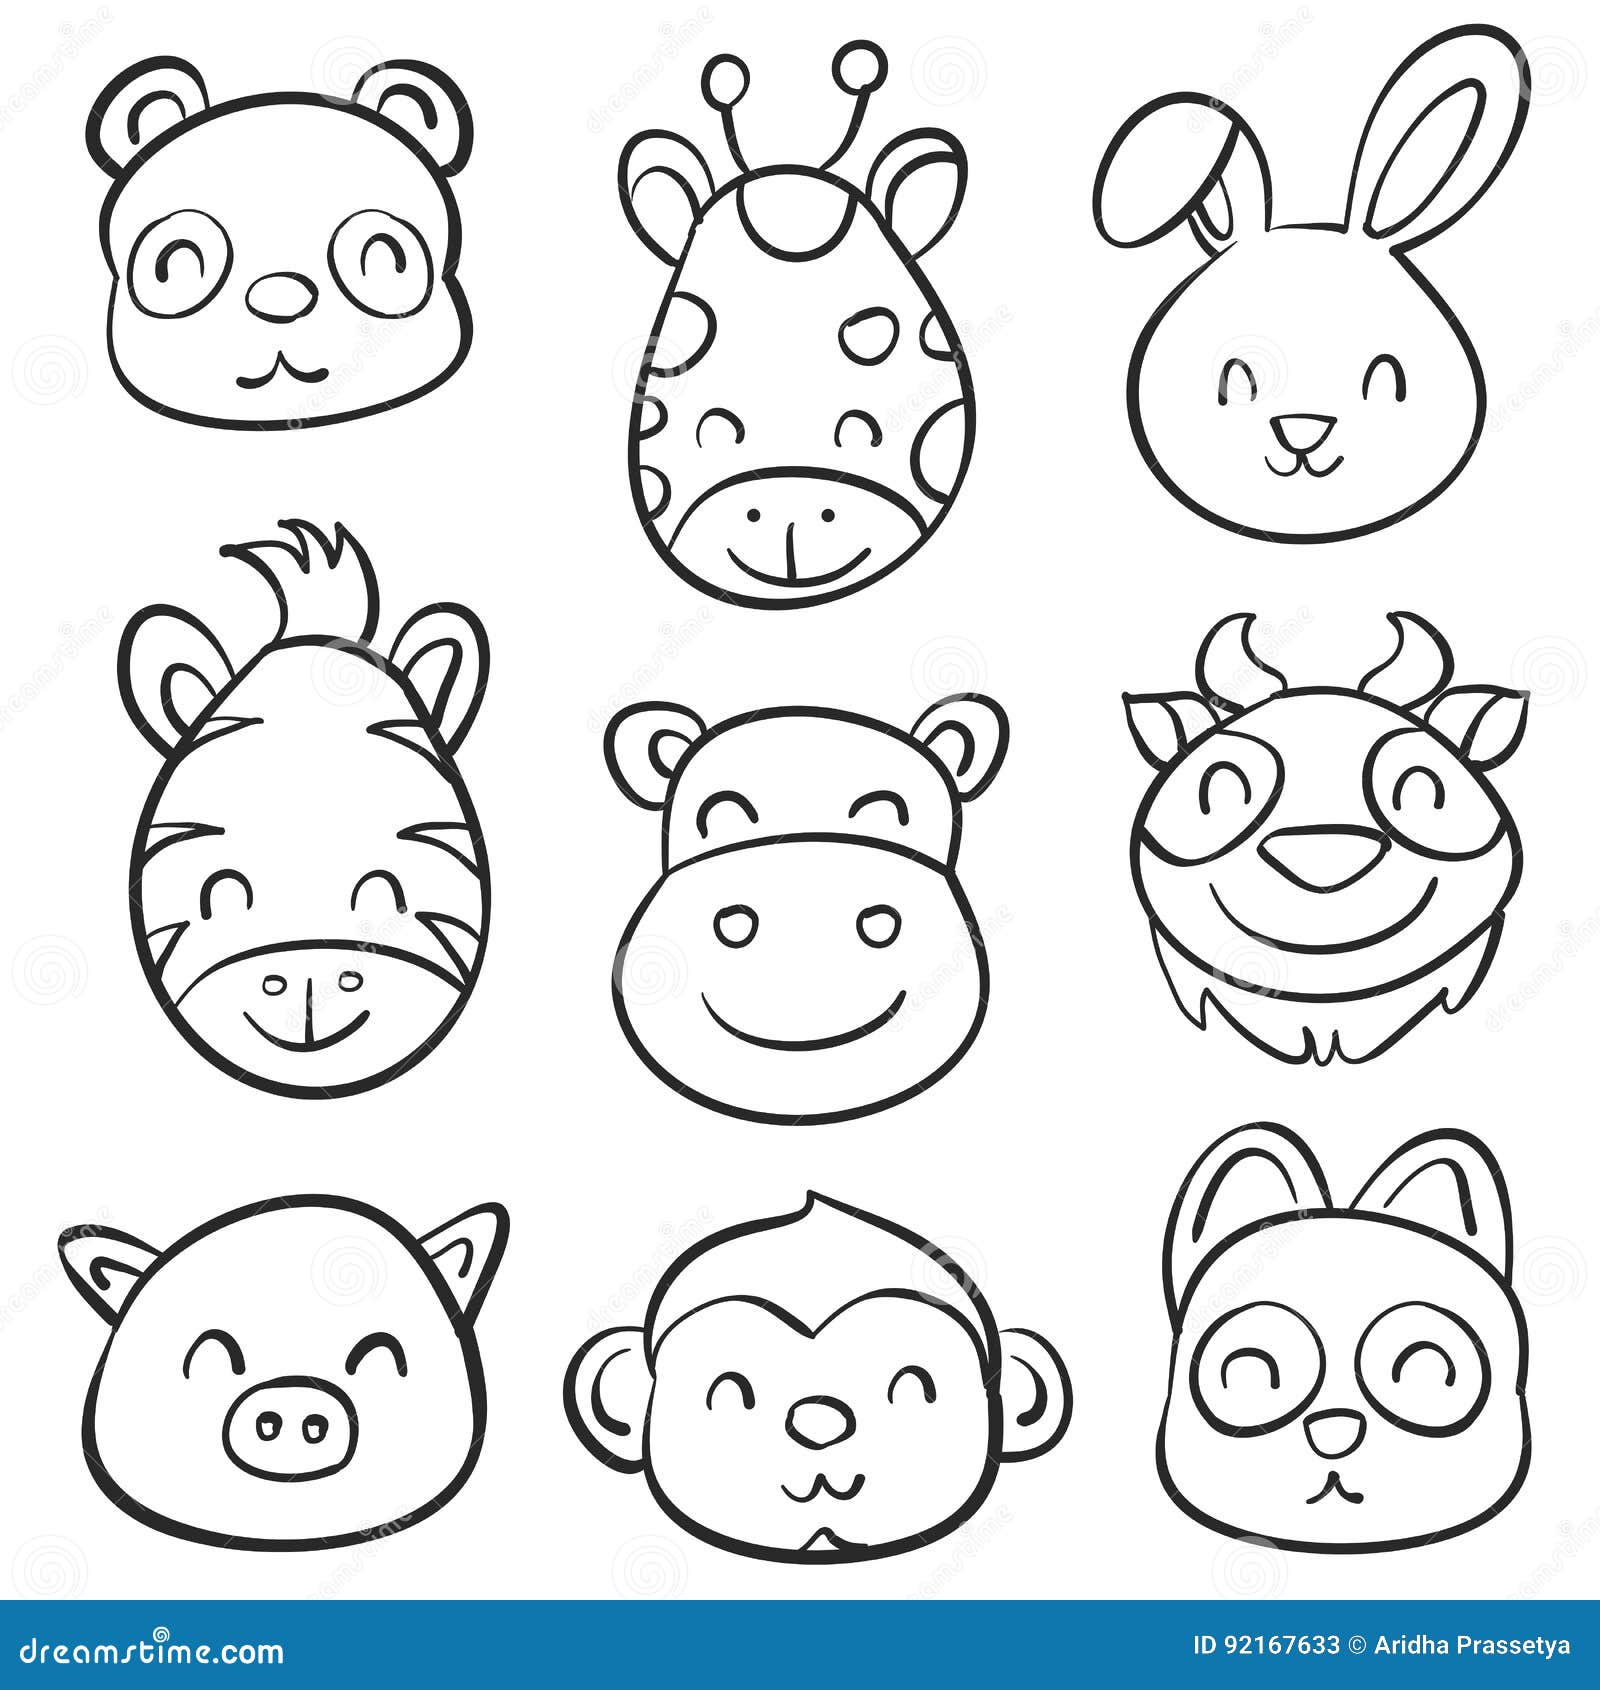 Cute Animal Hand Draw Doodle Collection Stock Vector - Illustration of ...